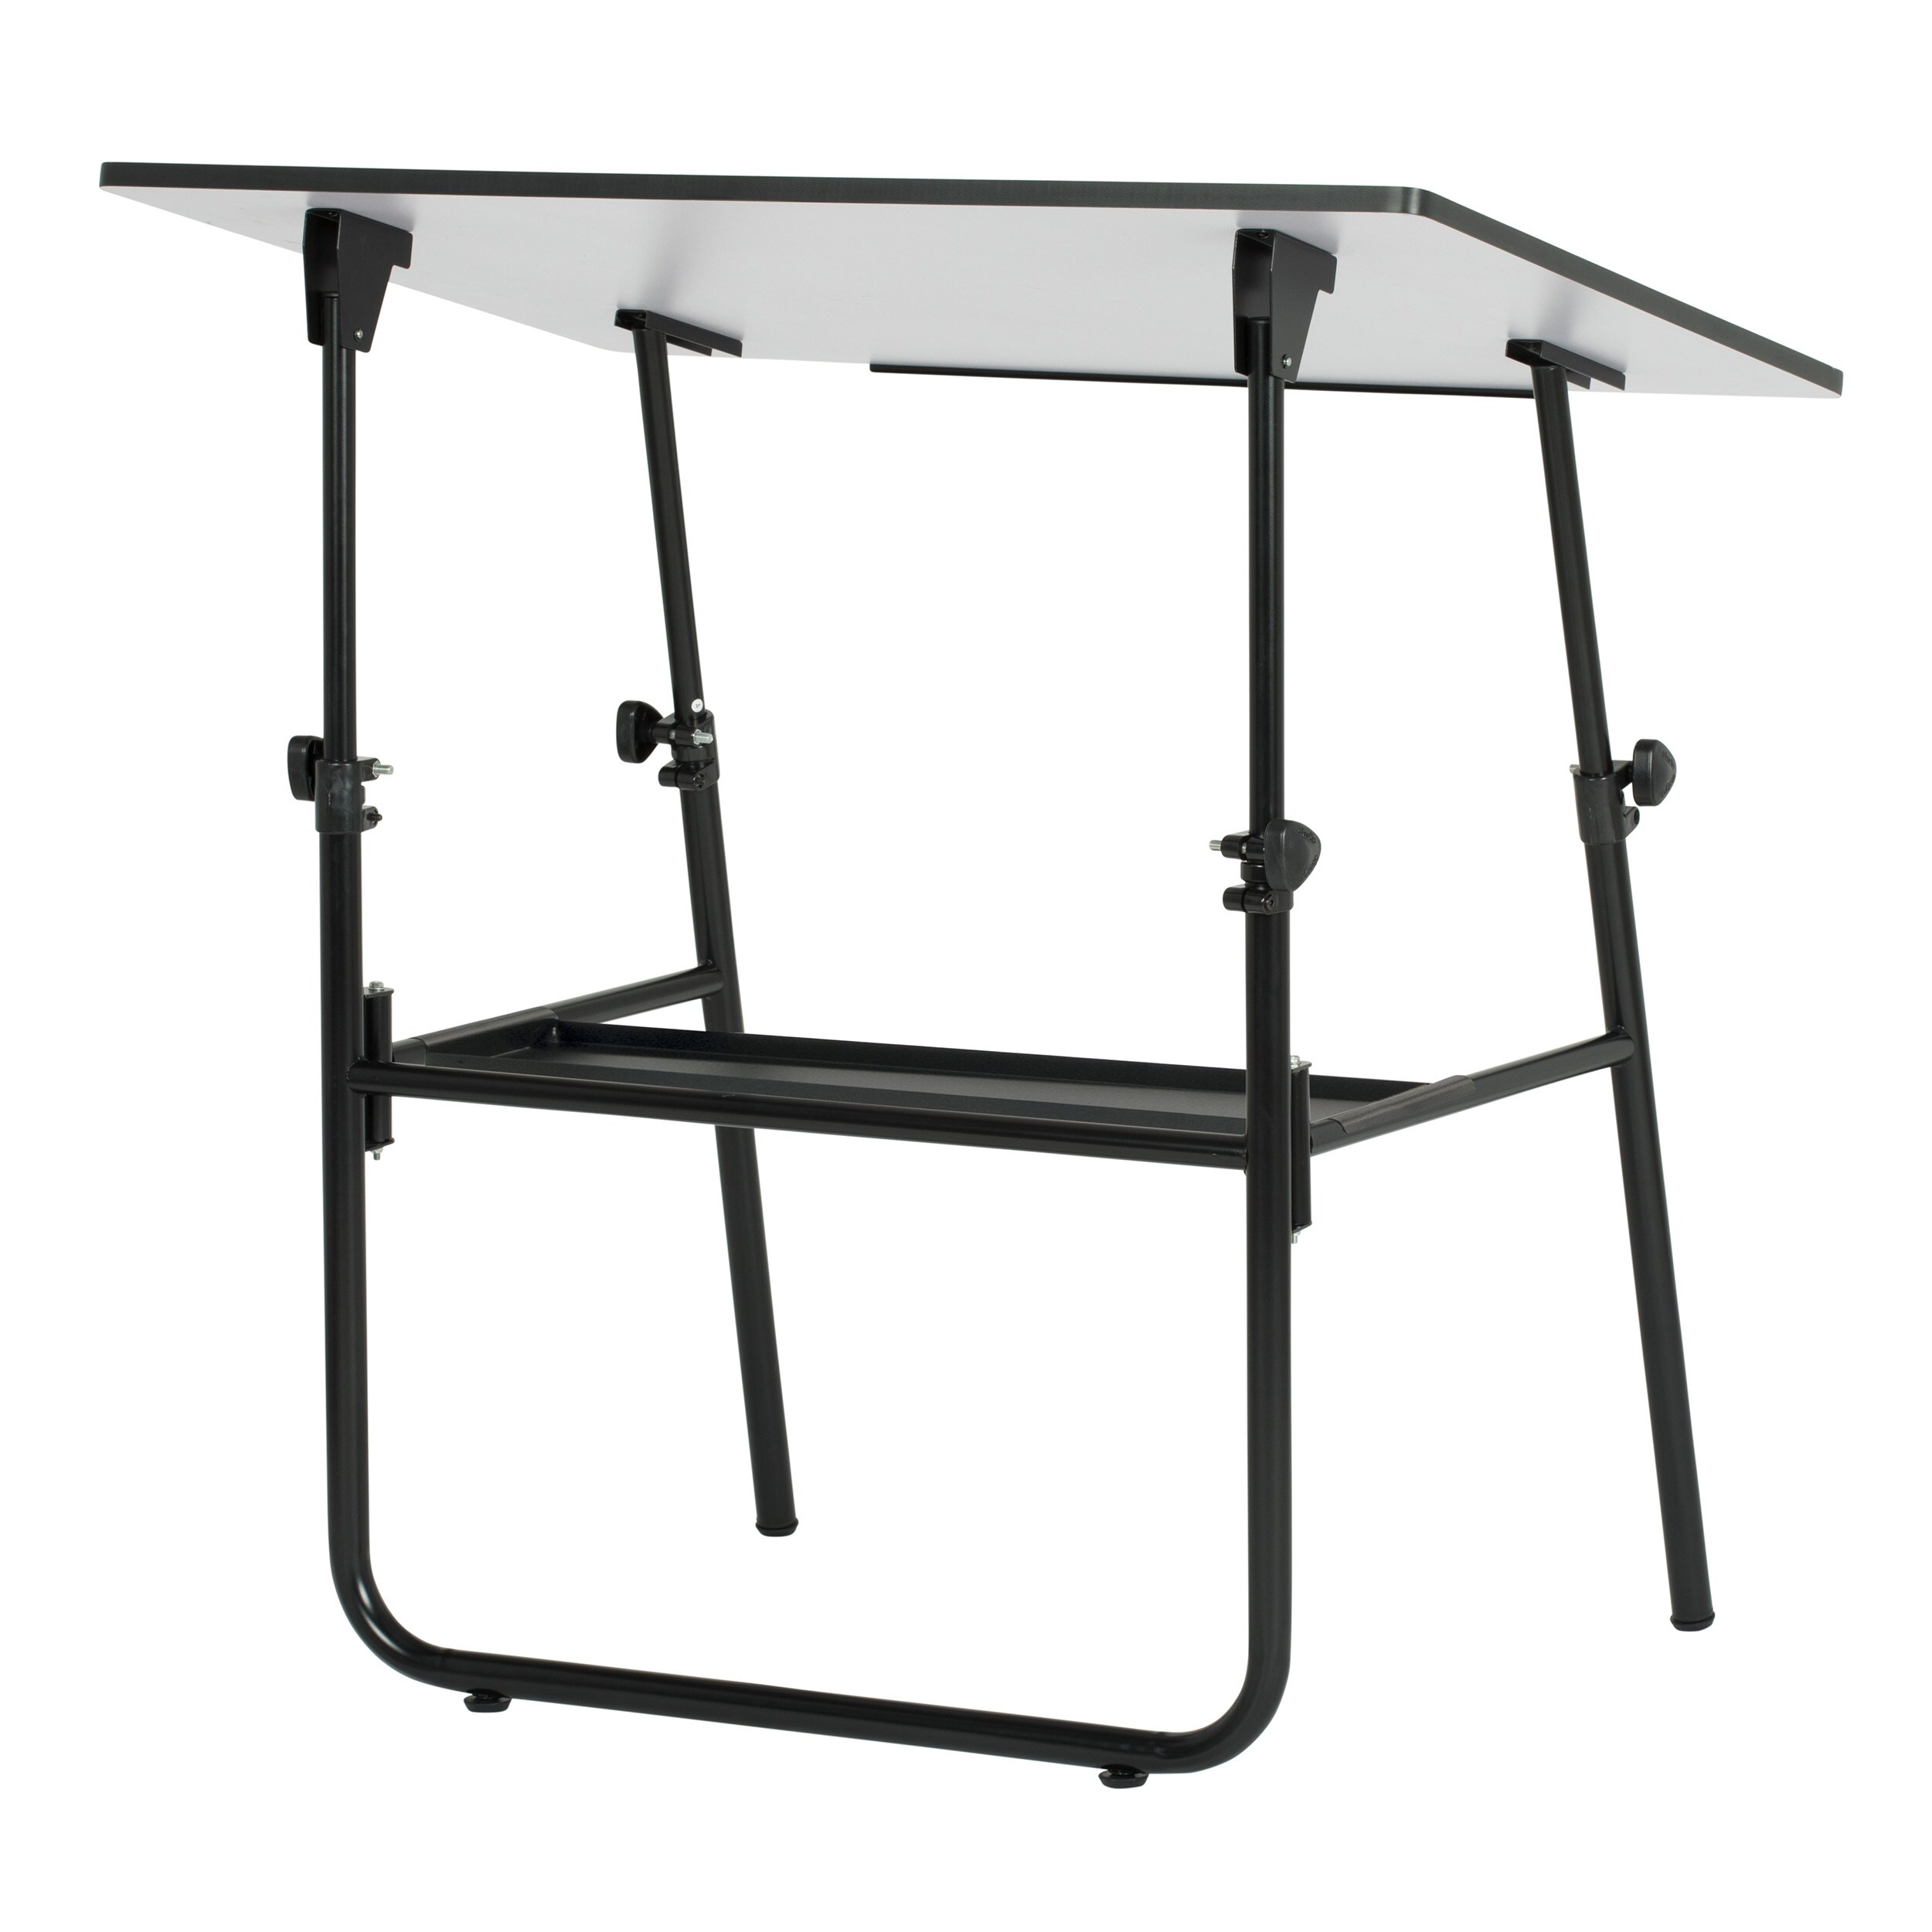 Studio Designs 42-inch Wood Drafting Table with Angle Adjustable Top for  Drawing - On Sale - Bed Bath & Beyond - 8330289